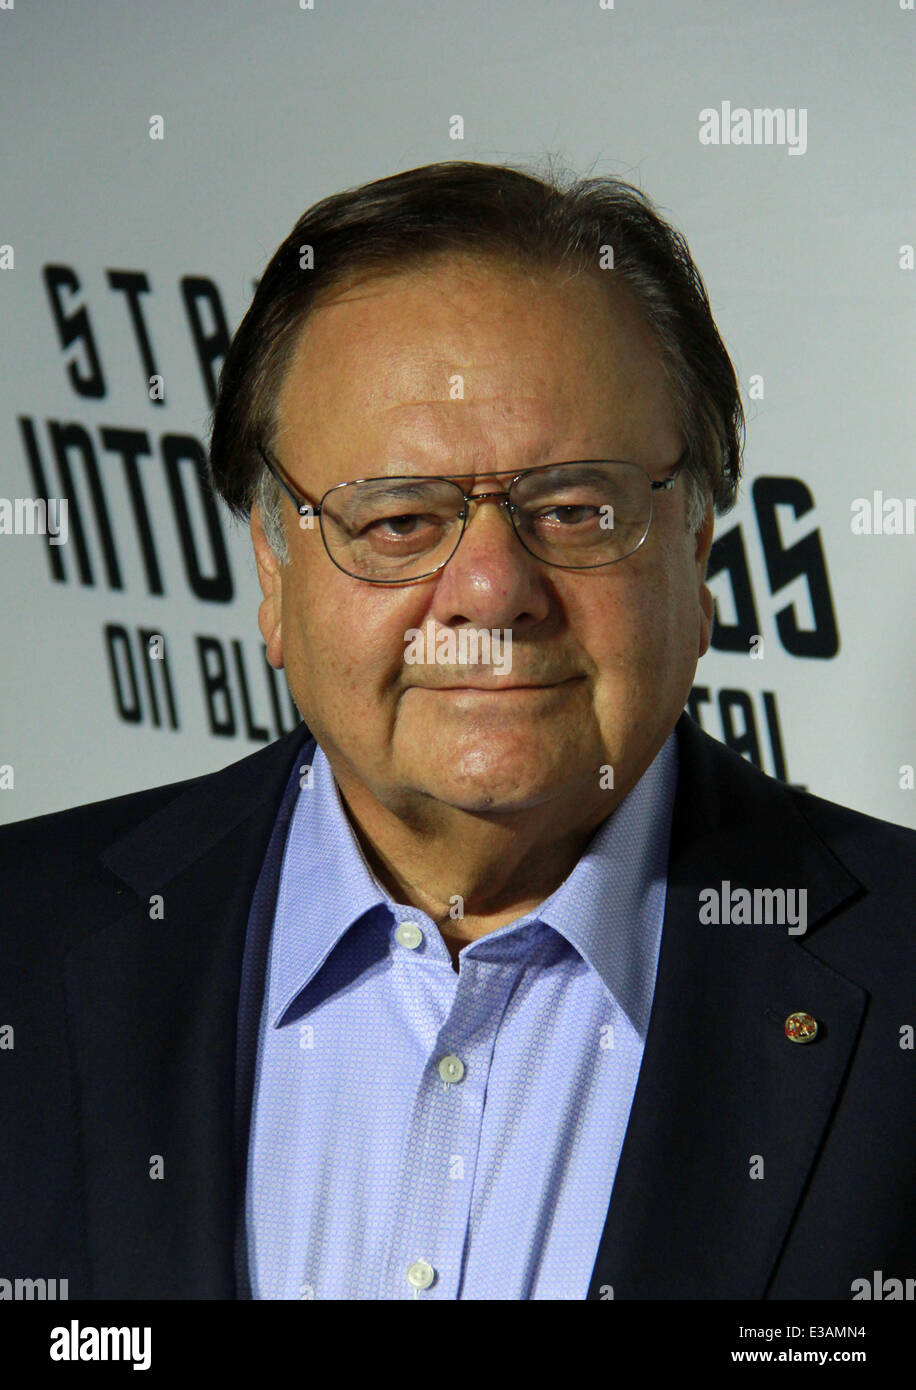 Paramount Pictures Celebrates The Blu-ray And DVD Debut Of 'Star Trek: Into Darkness' Held at California Science Center  Featuring: Paul Sorvino Where: Los Angeles, California, United States When: 11 Sep 2013 Stock Photo